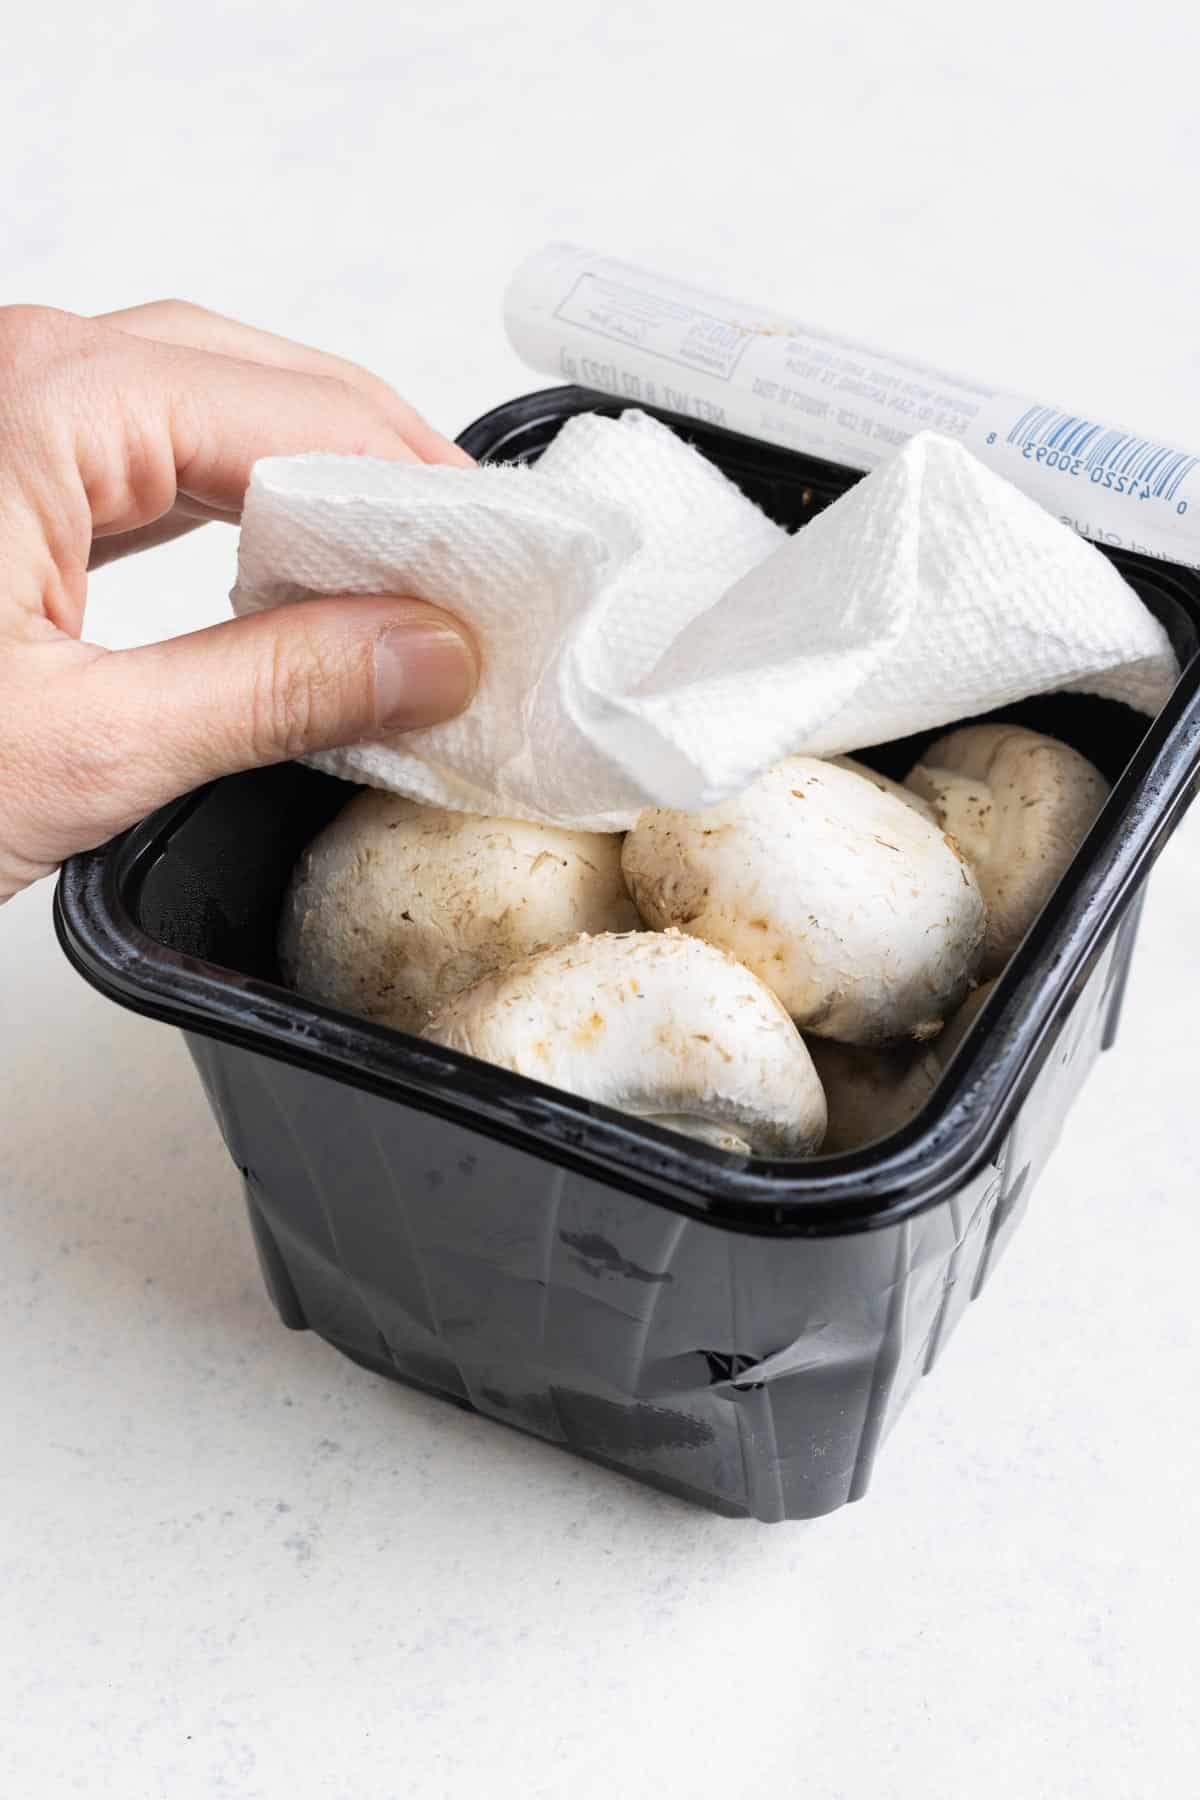 Putting a paper towel on top of a store-bought container full of whole mushrooms.